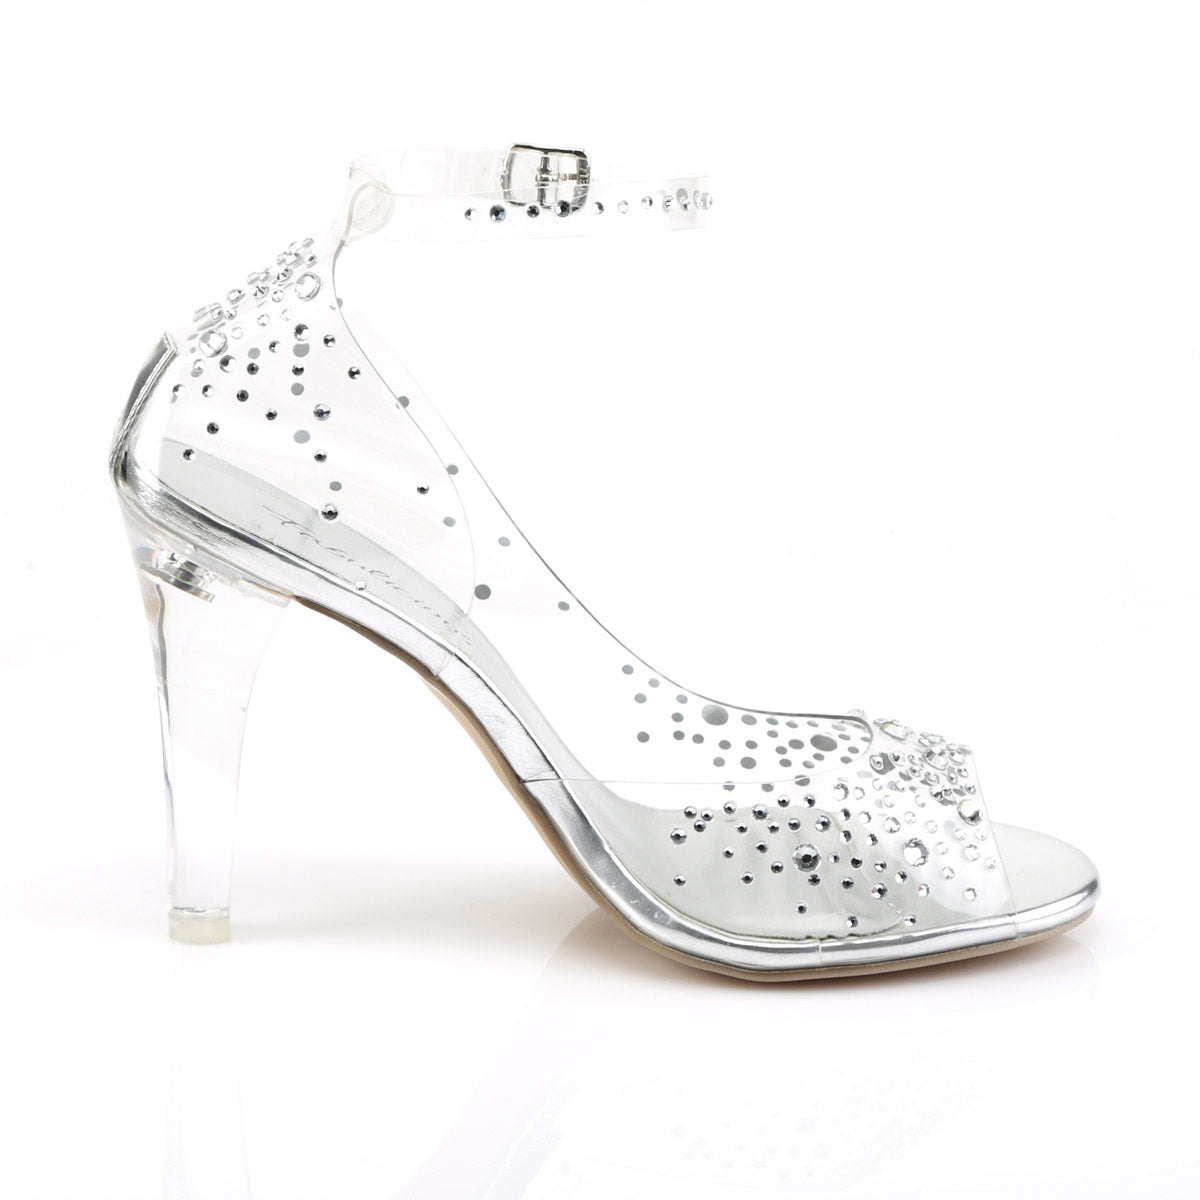 Sexy Rhinestone Studs Half D'Orsay Peep Toe Sandals High Heels Shoes Pleaser Fabulicious CLEARLY/430RS